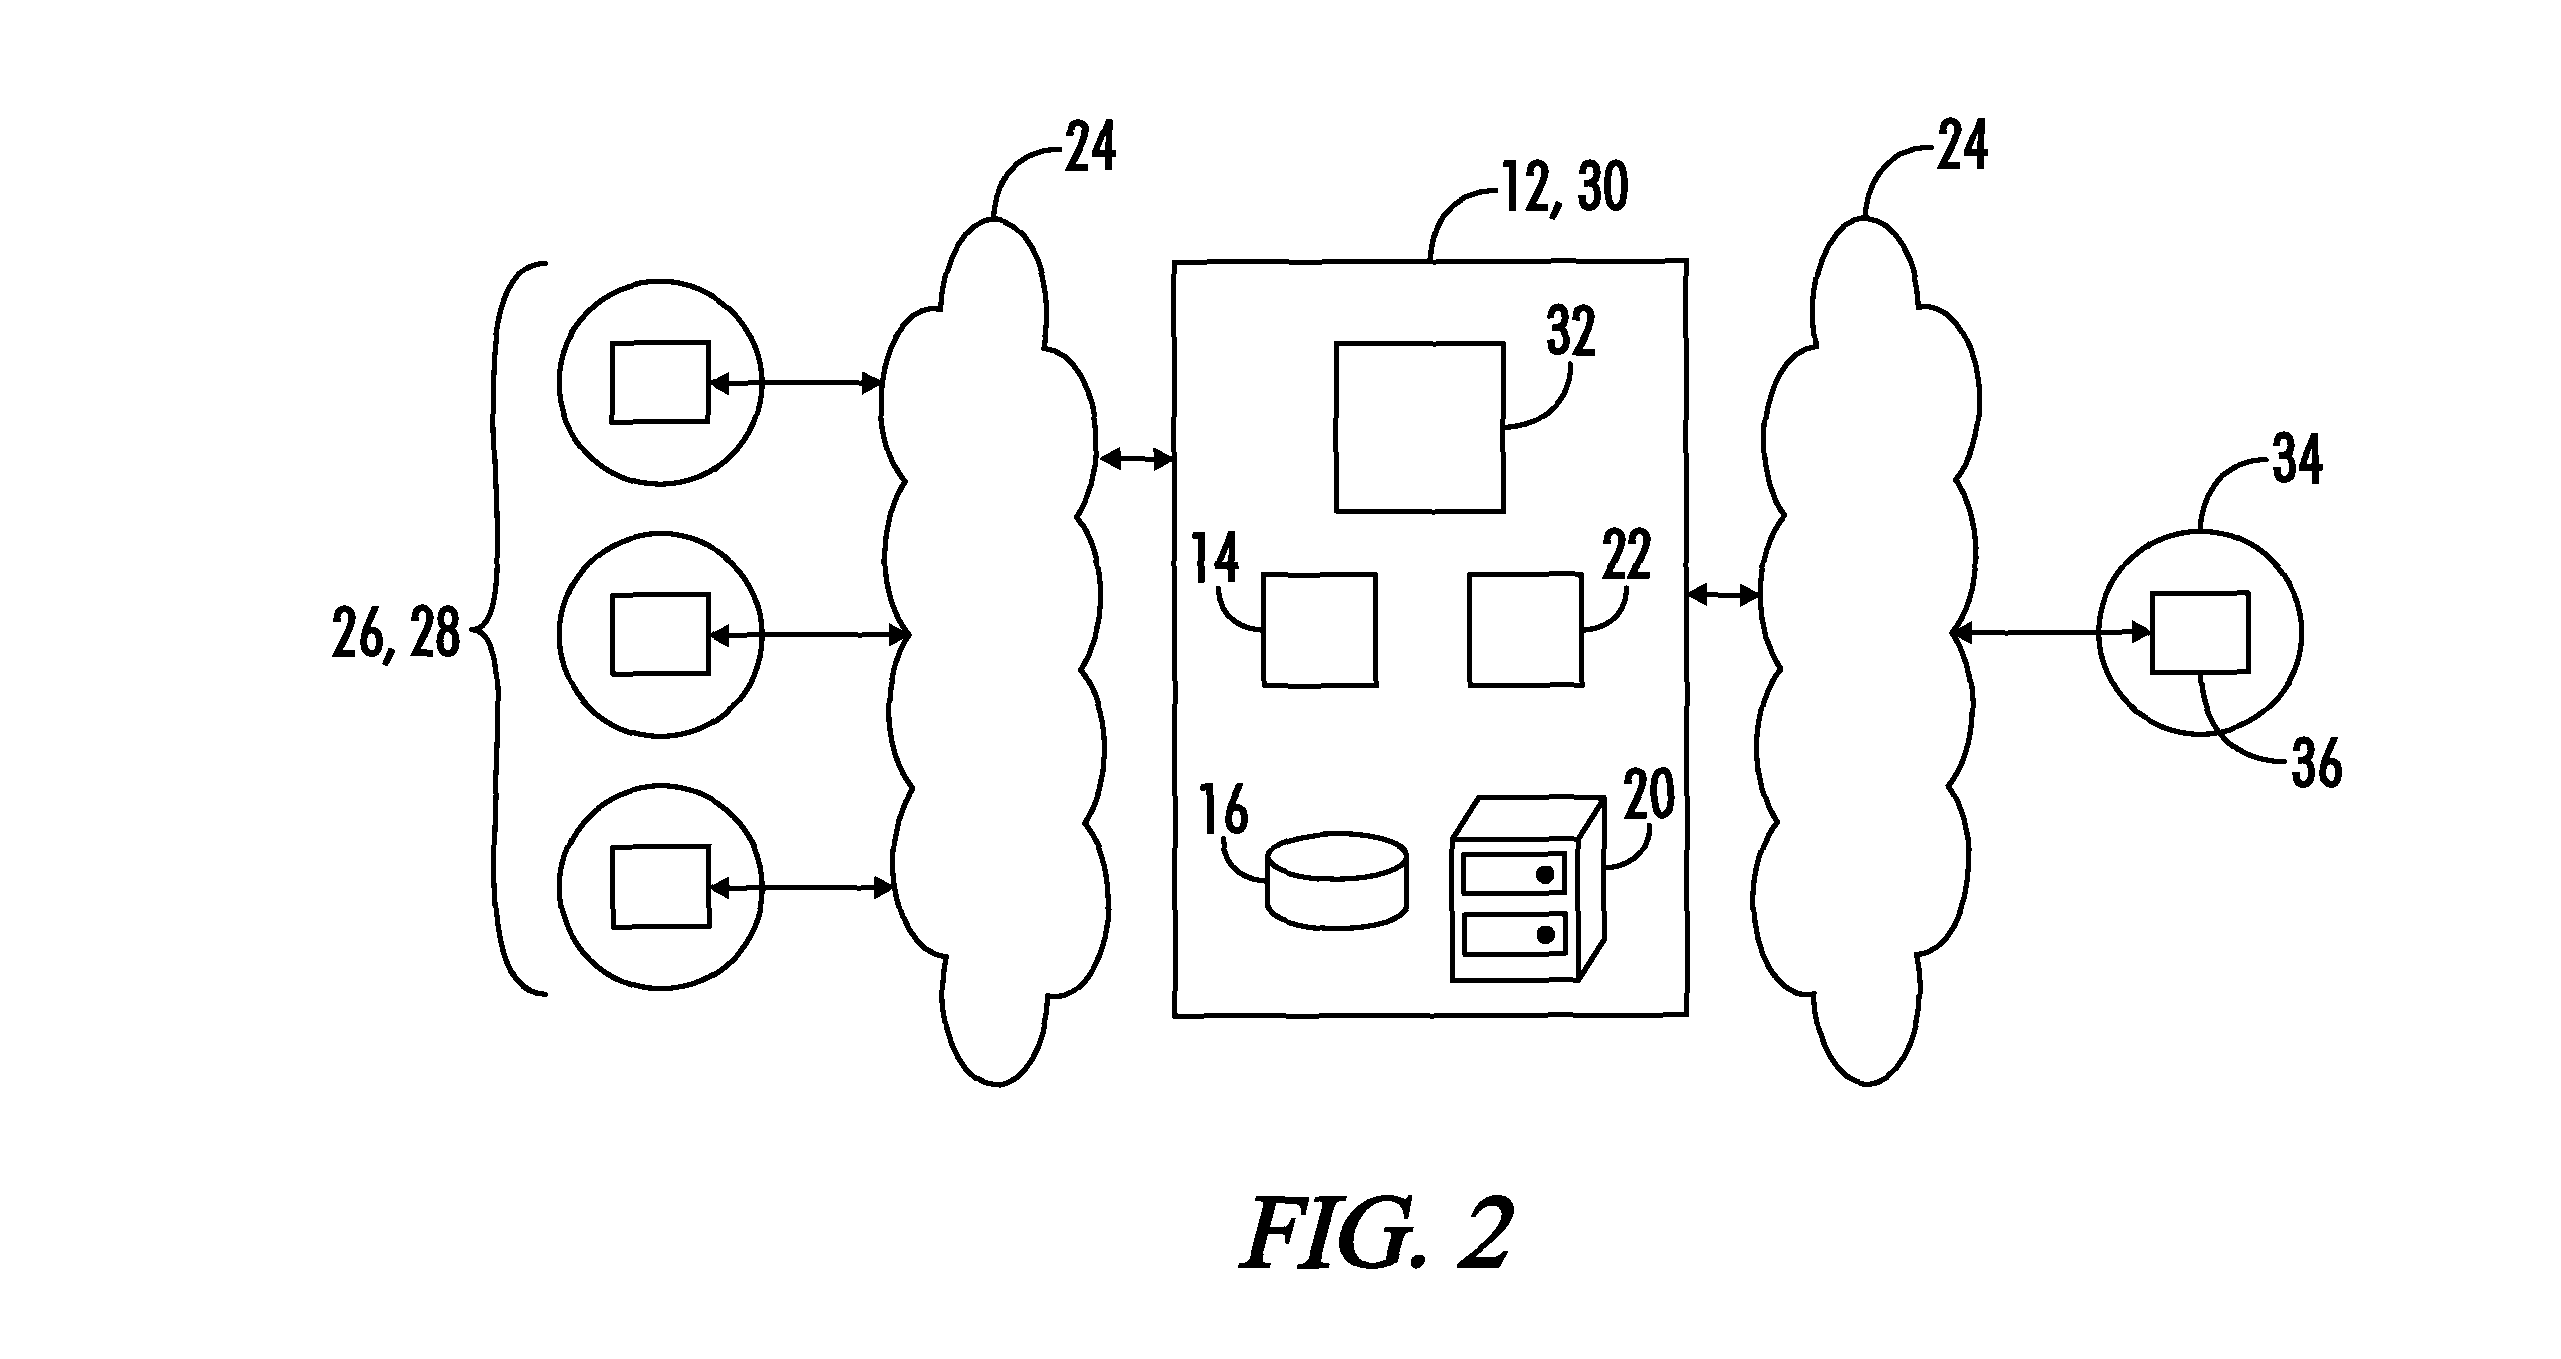 System and method of social commerce analytics for social networking data and related transactional data